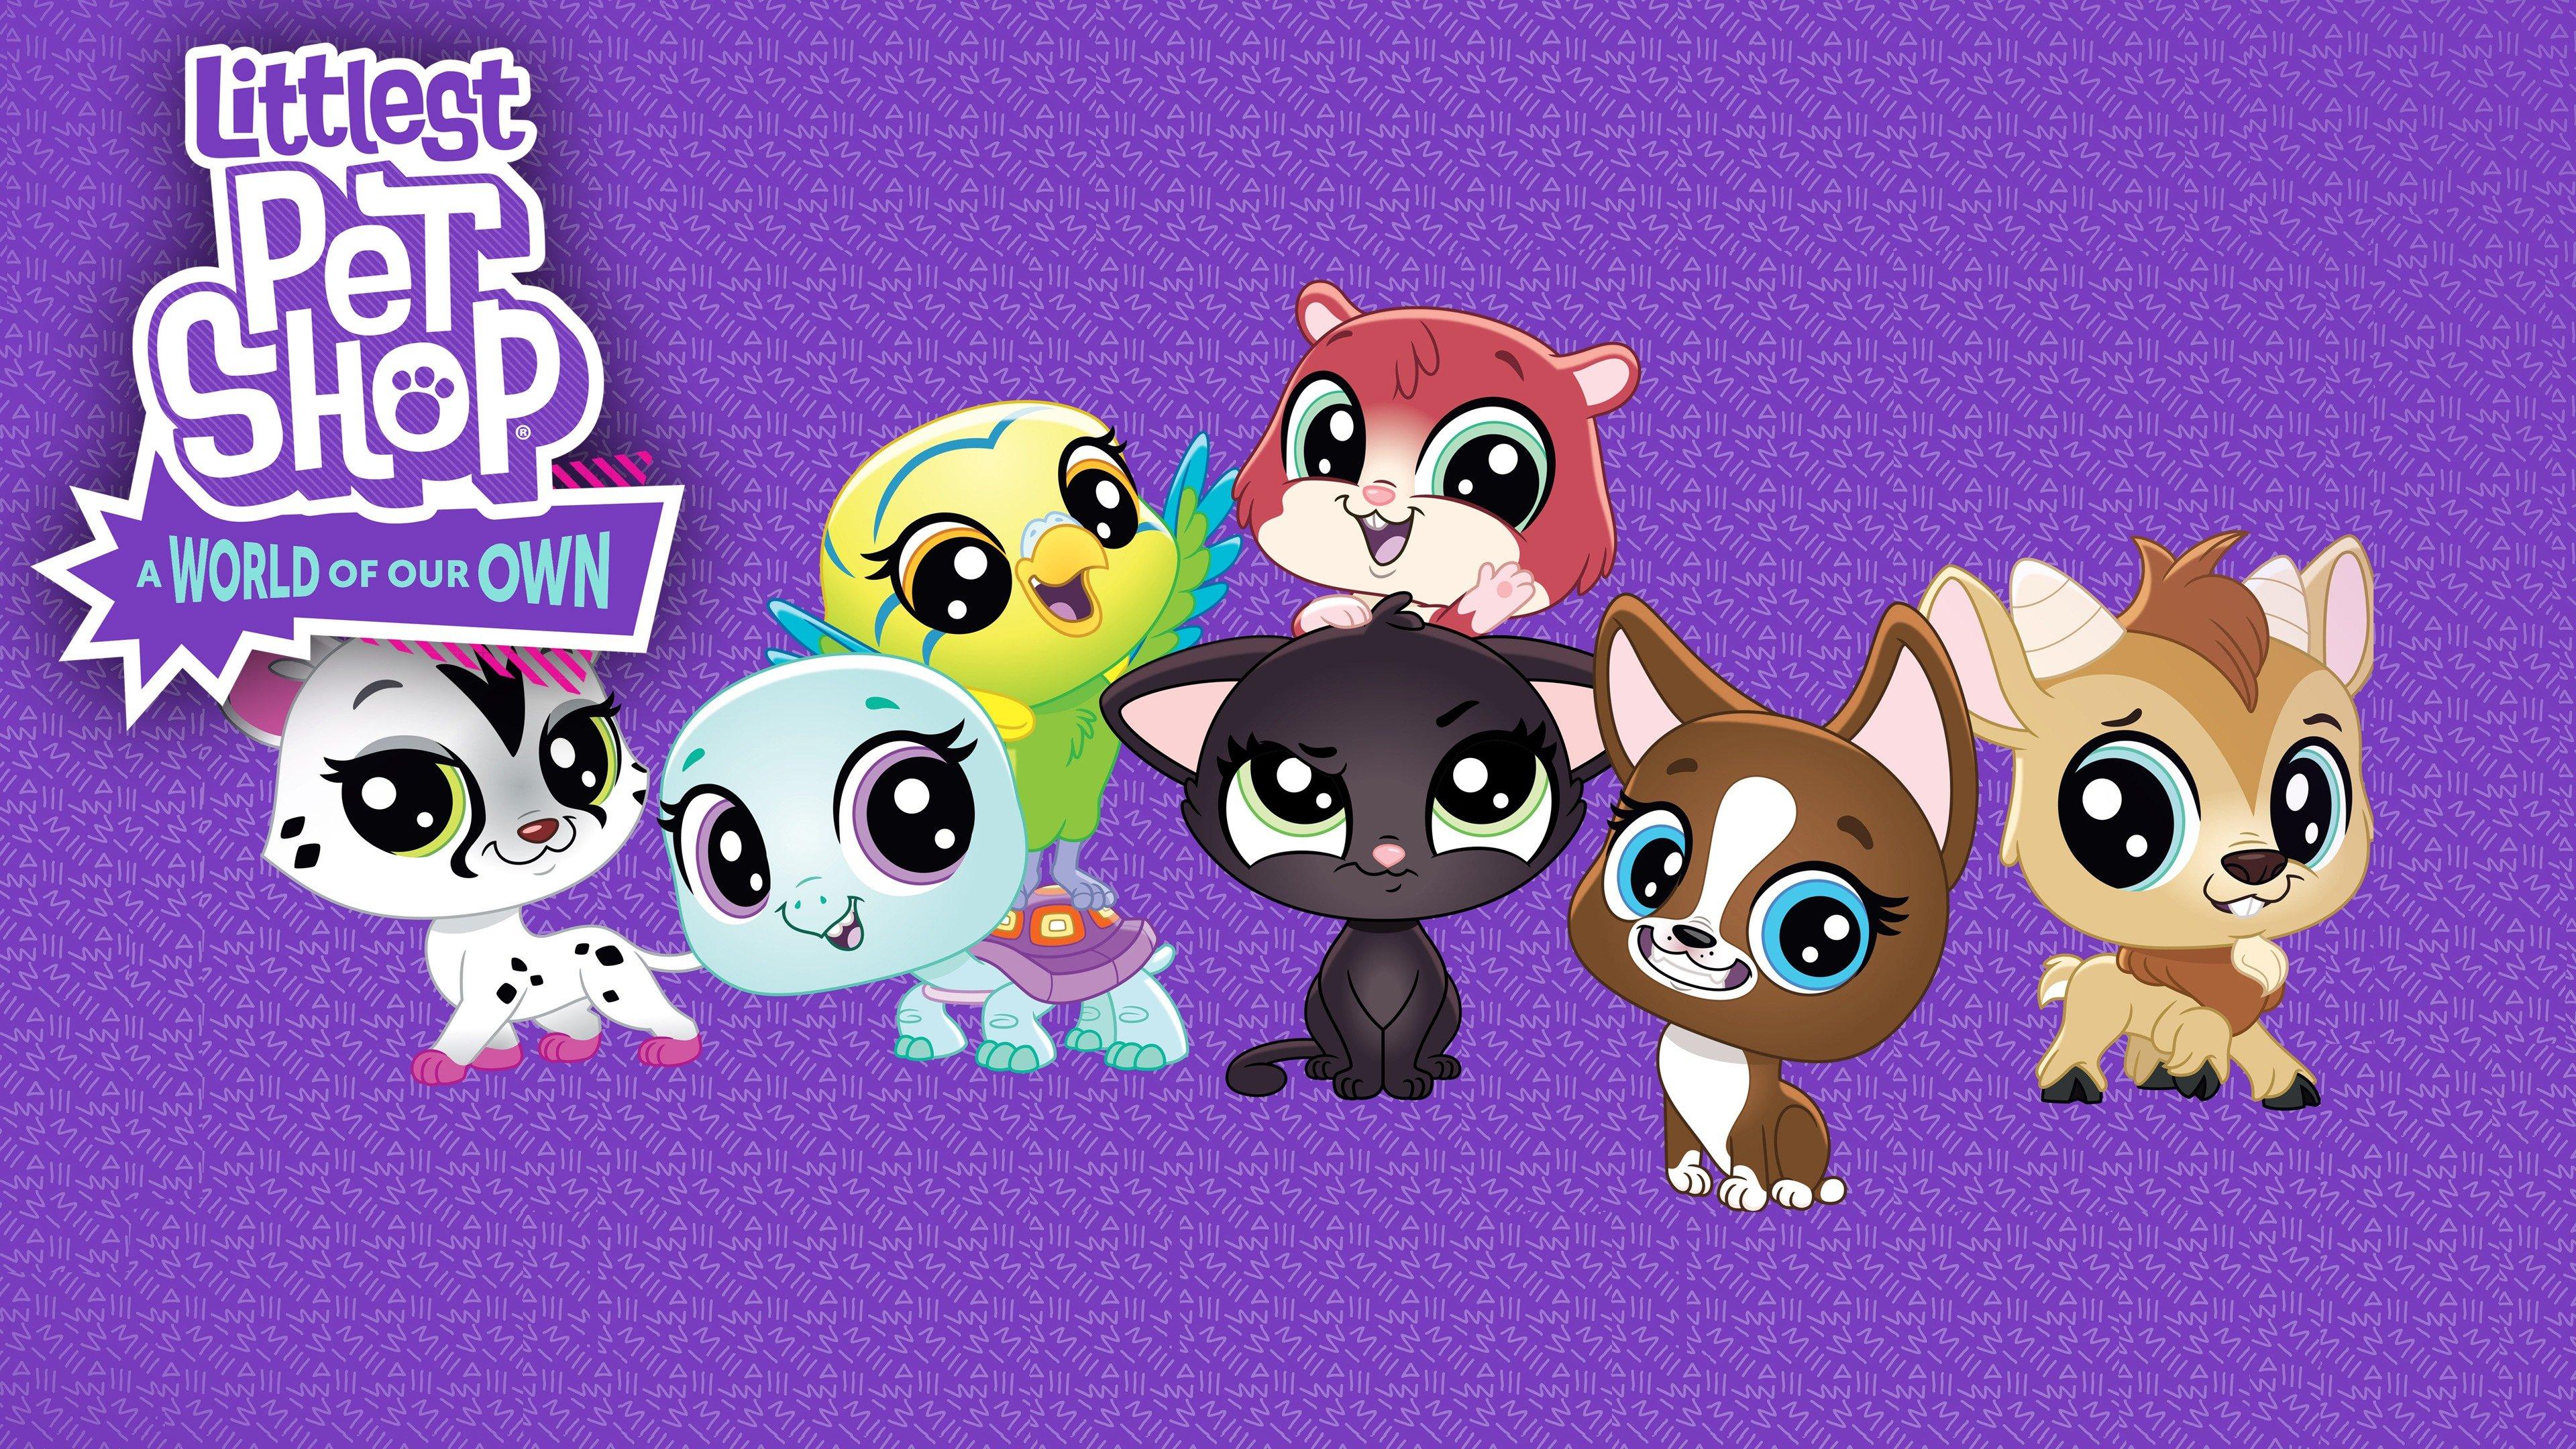 Watch Littlest Pet Shop A World of Our Own Streaming Online on Philo